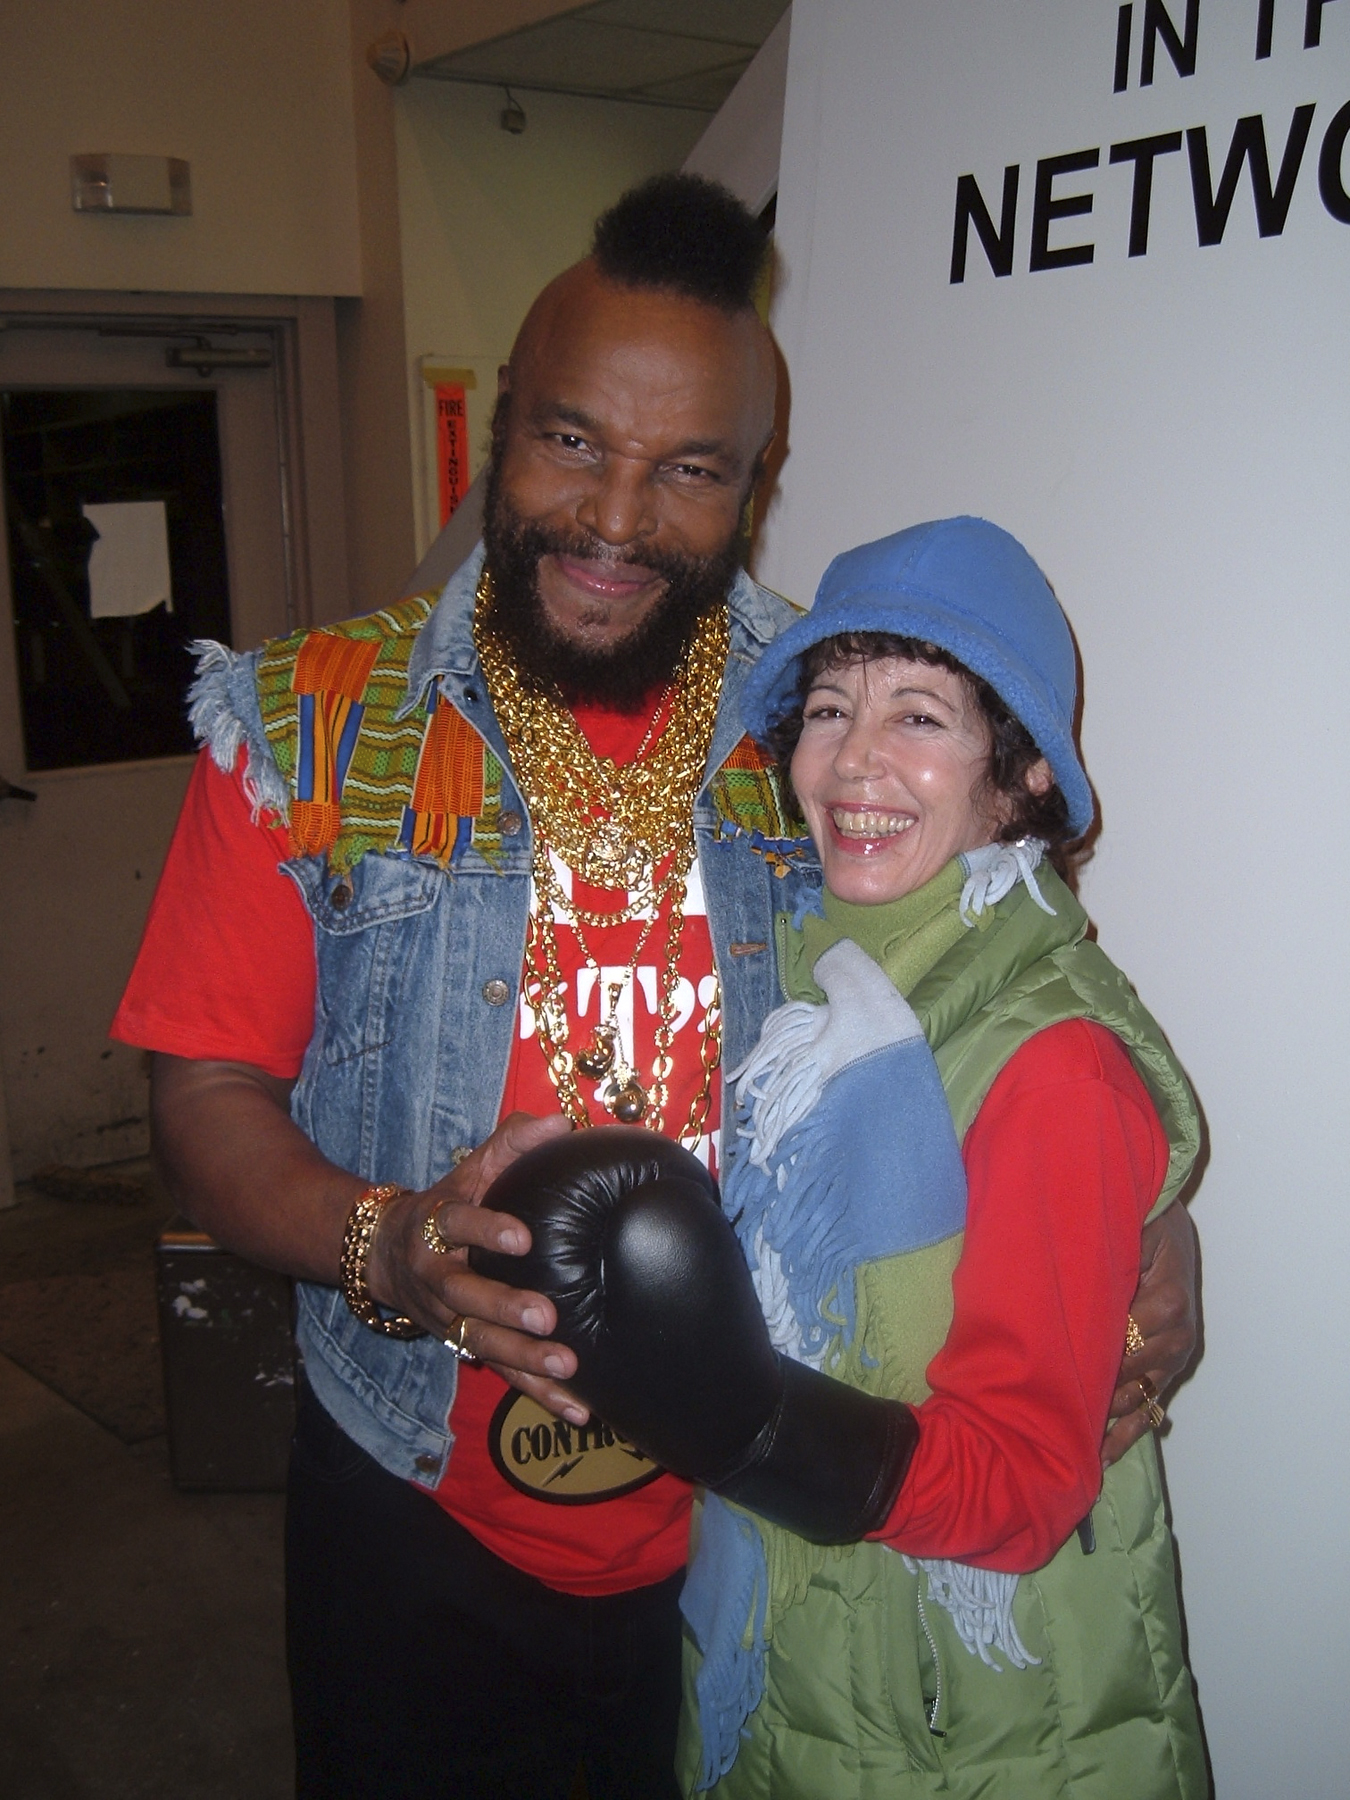 Commercial shoot in '06 (L-R Mr. T & me)